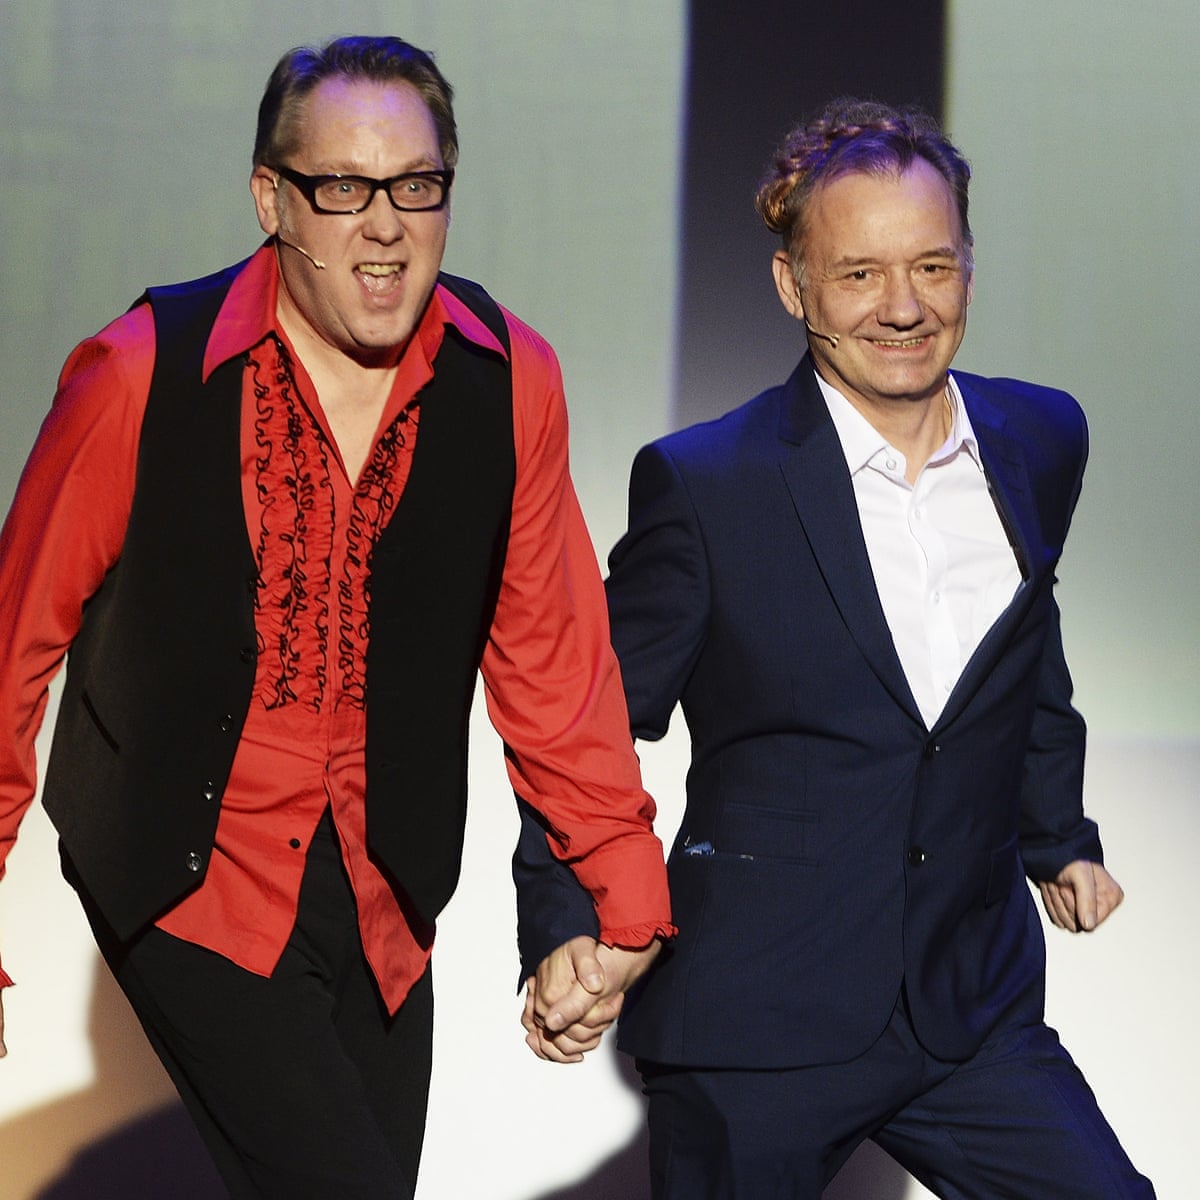 The Best Of Reeves Mortimer: Our Rundown Of Their Finest Moments Vic ...